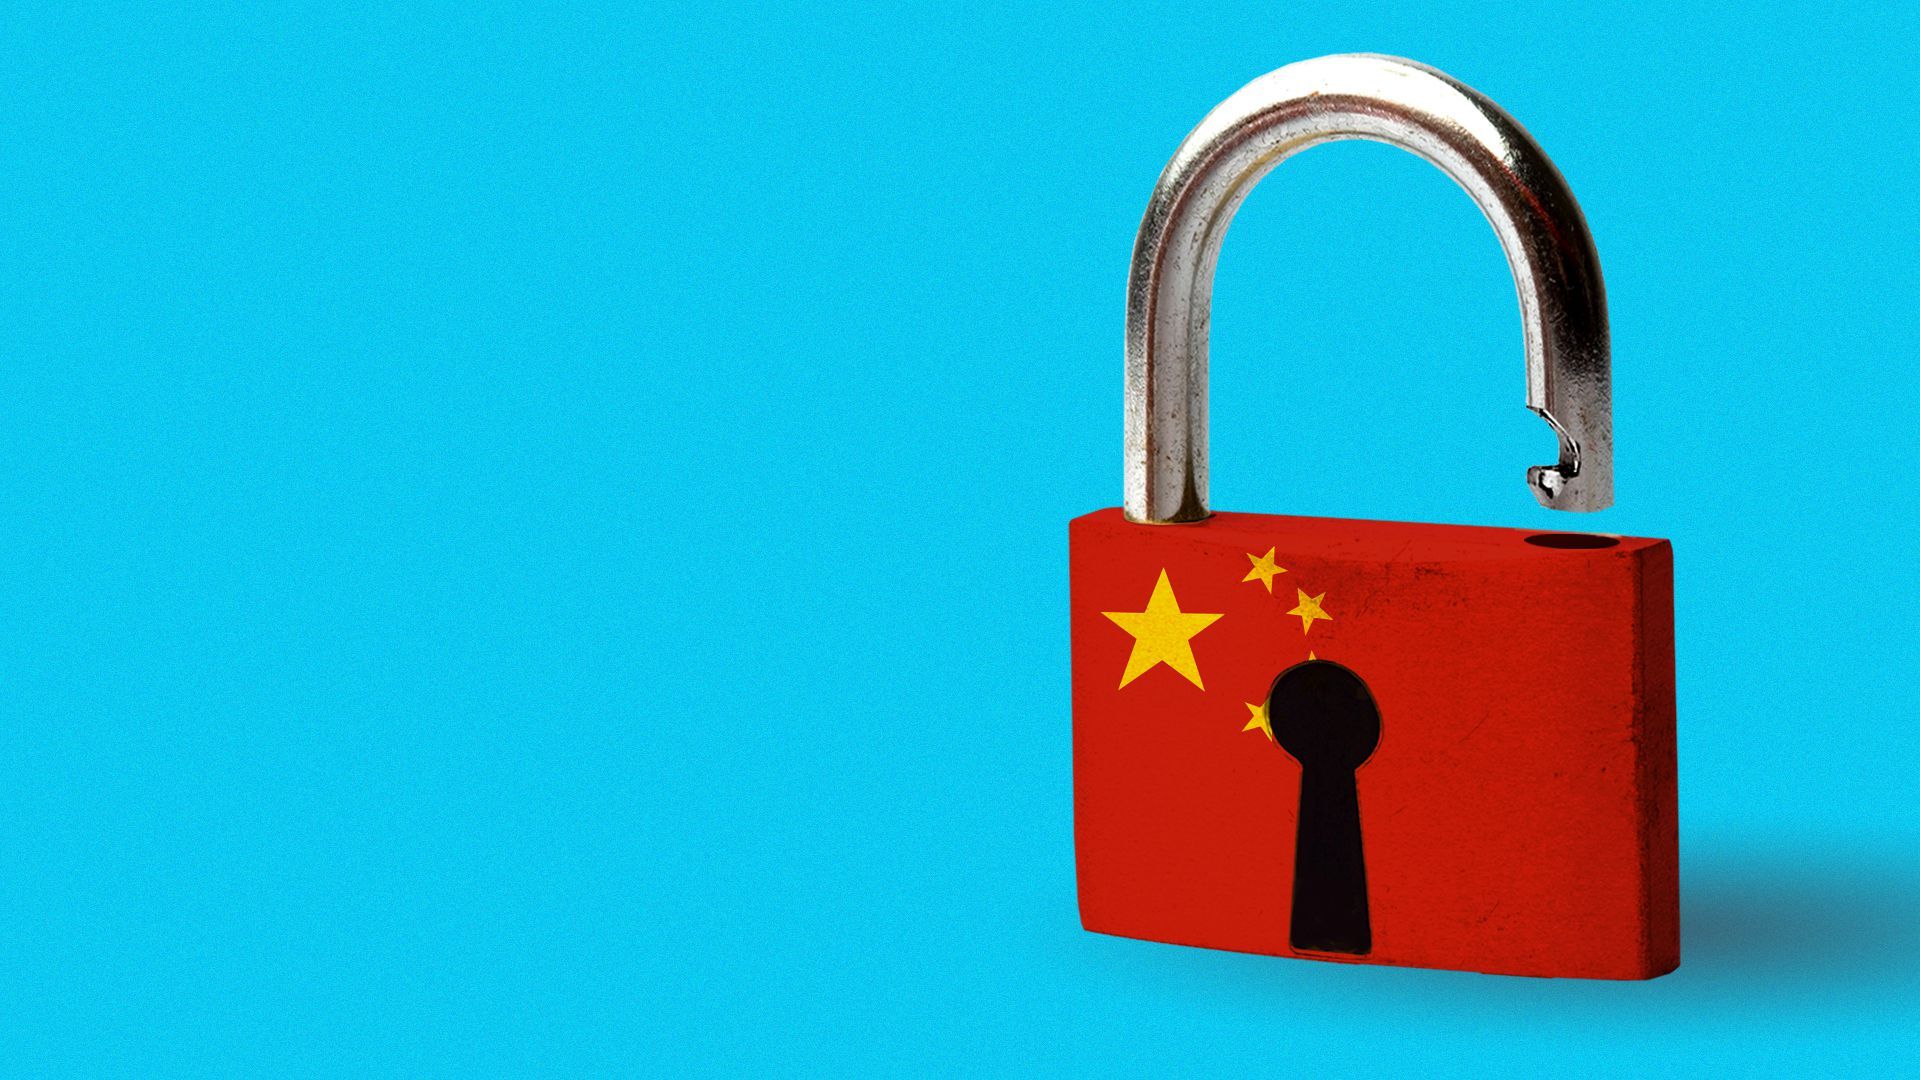 Illustration of an open padlock with the Chinese flag on it